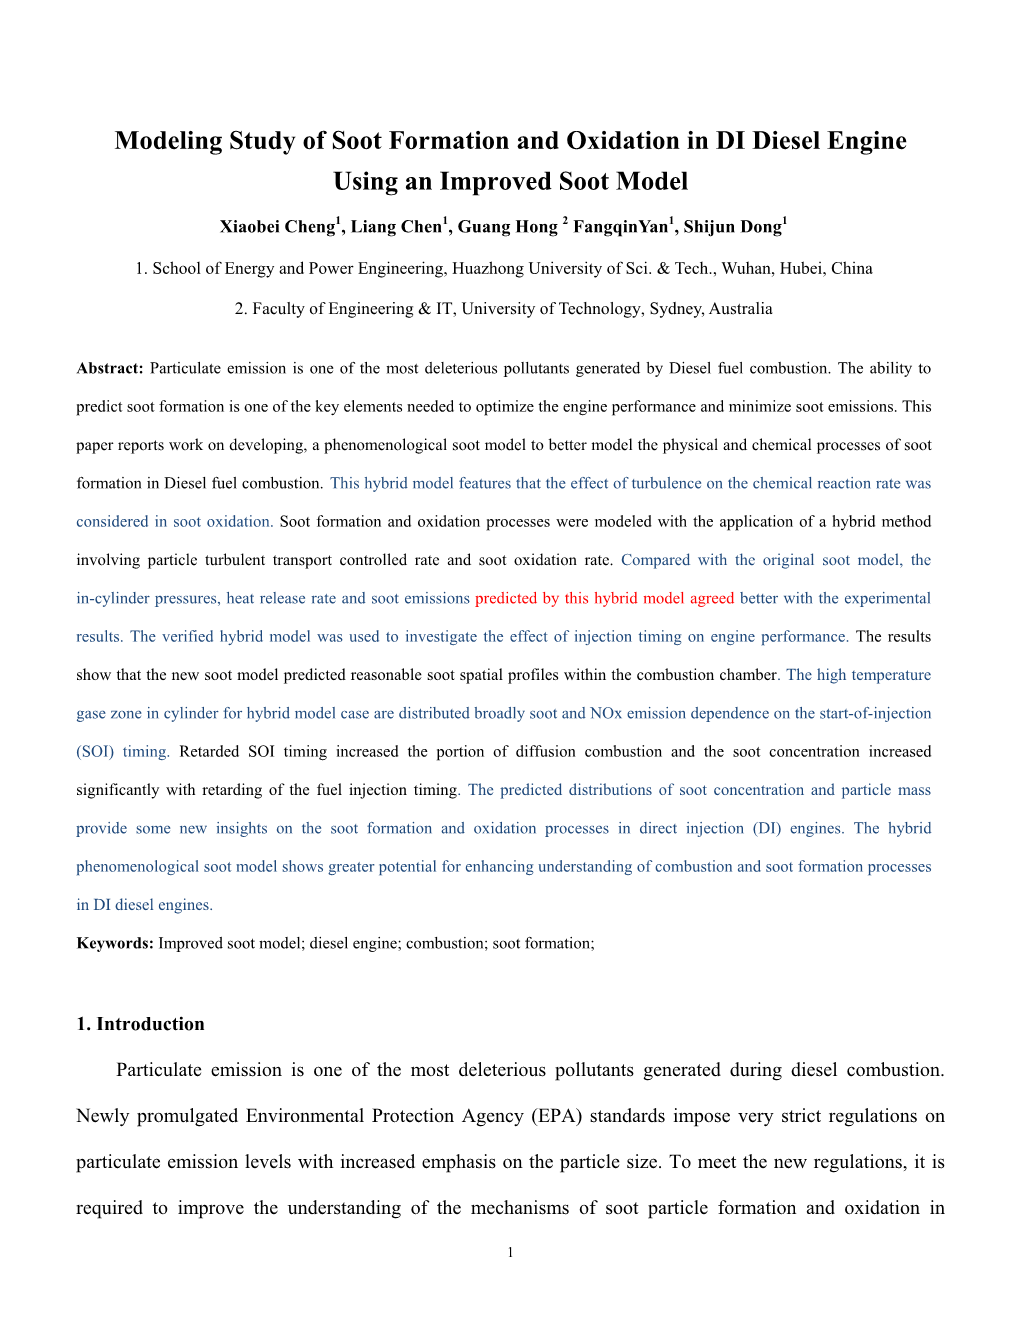 Modeling Study of Soot Formation and Oxidation in DI Diesel Engine Using an Improved Soot Model